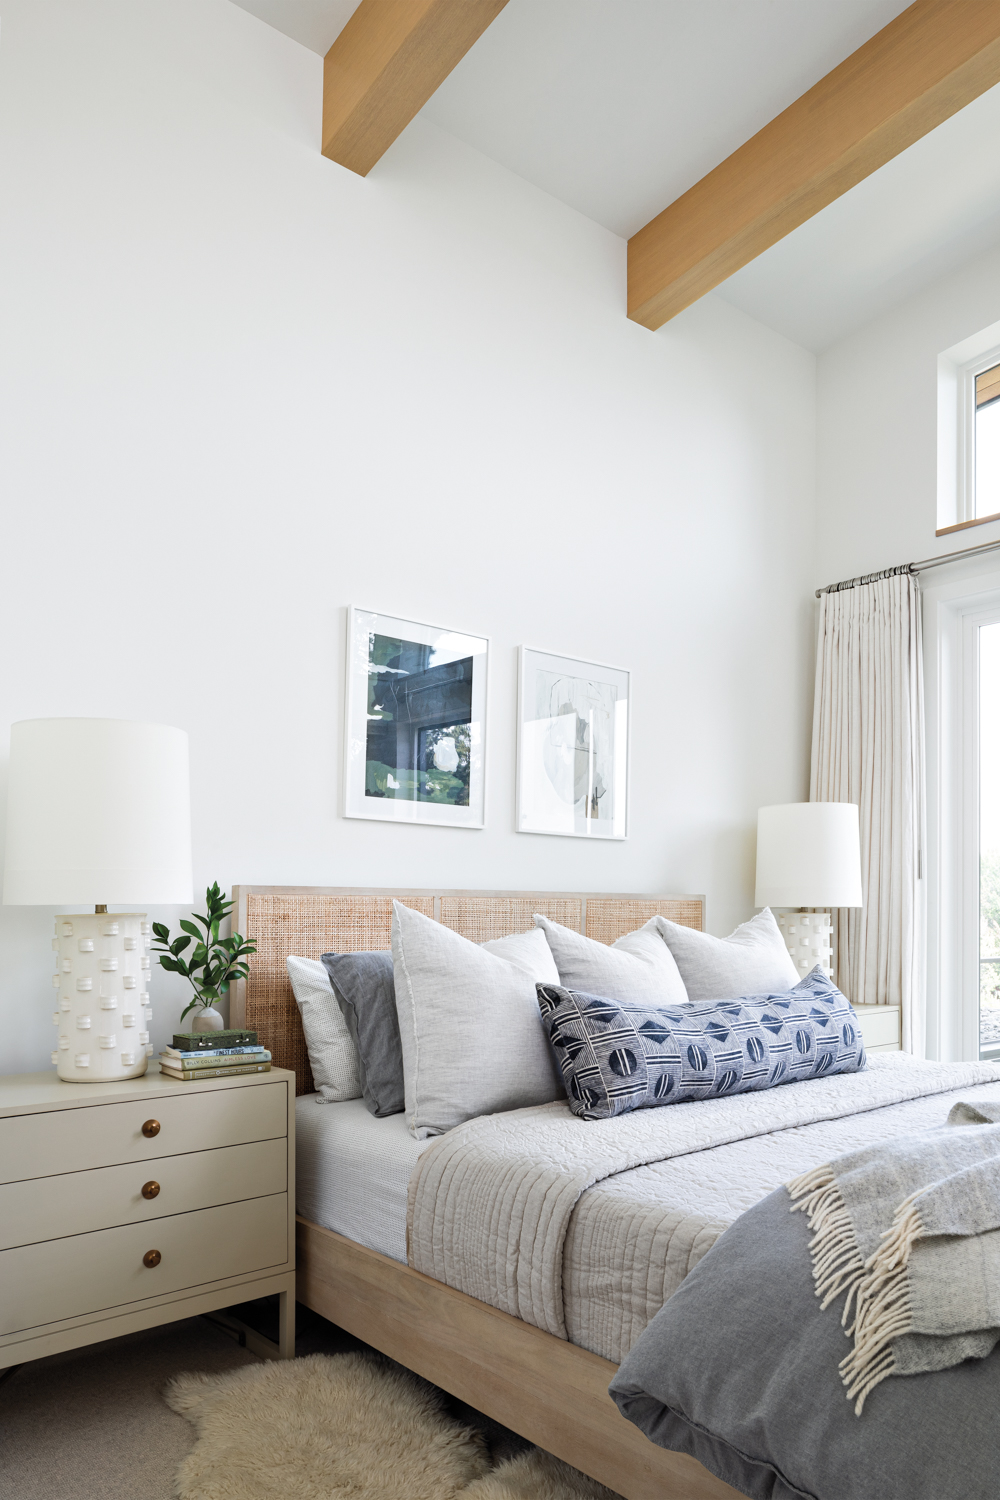 modern bedroom features shades of white, blue and gray